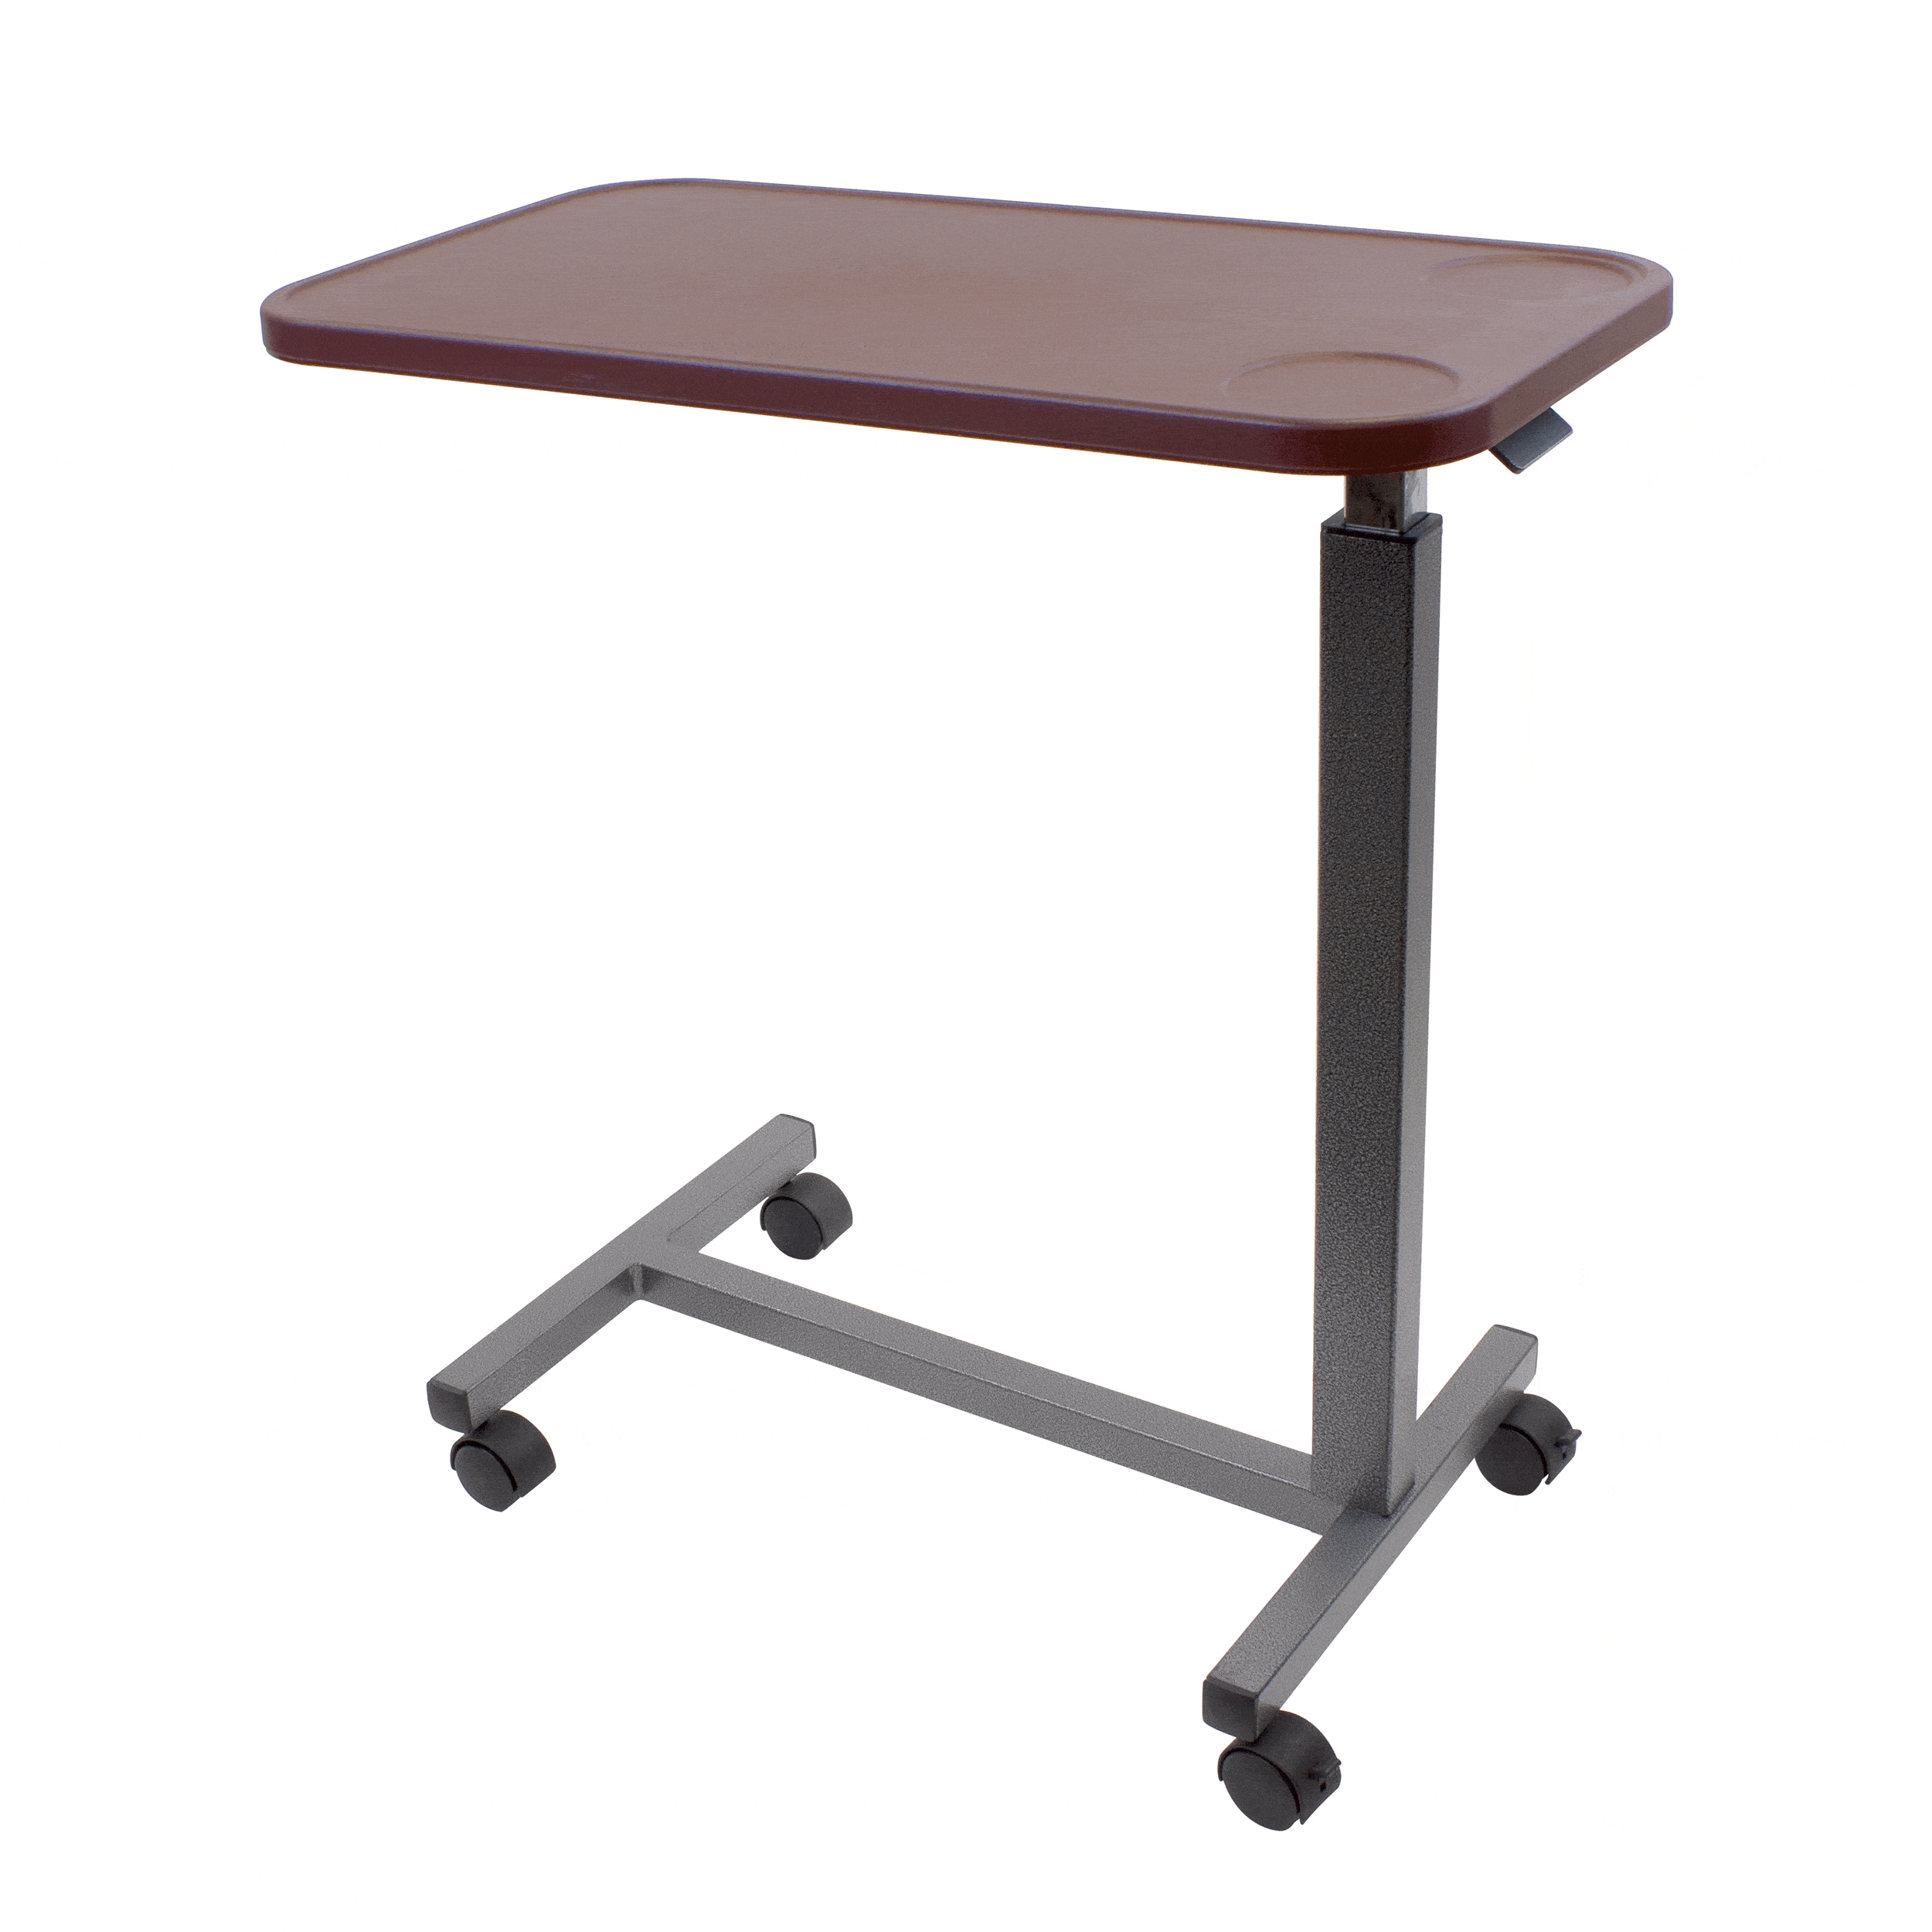 Nurse's Station and Office Supplies 3039-2 C GRAHAM-FIELD, INCORPORATED